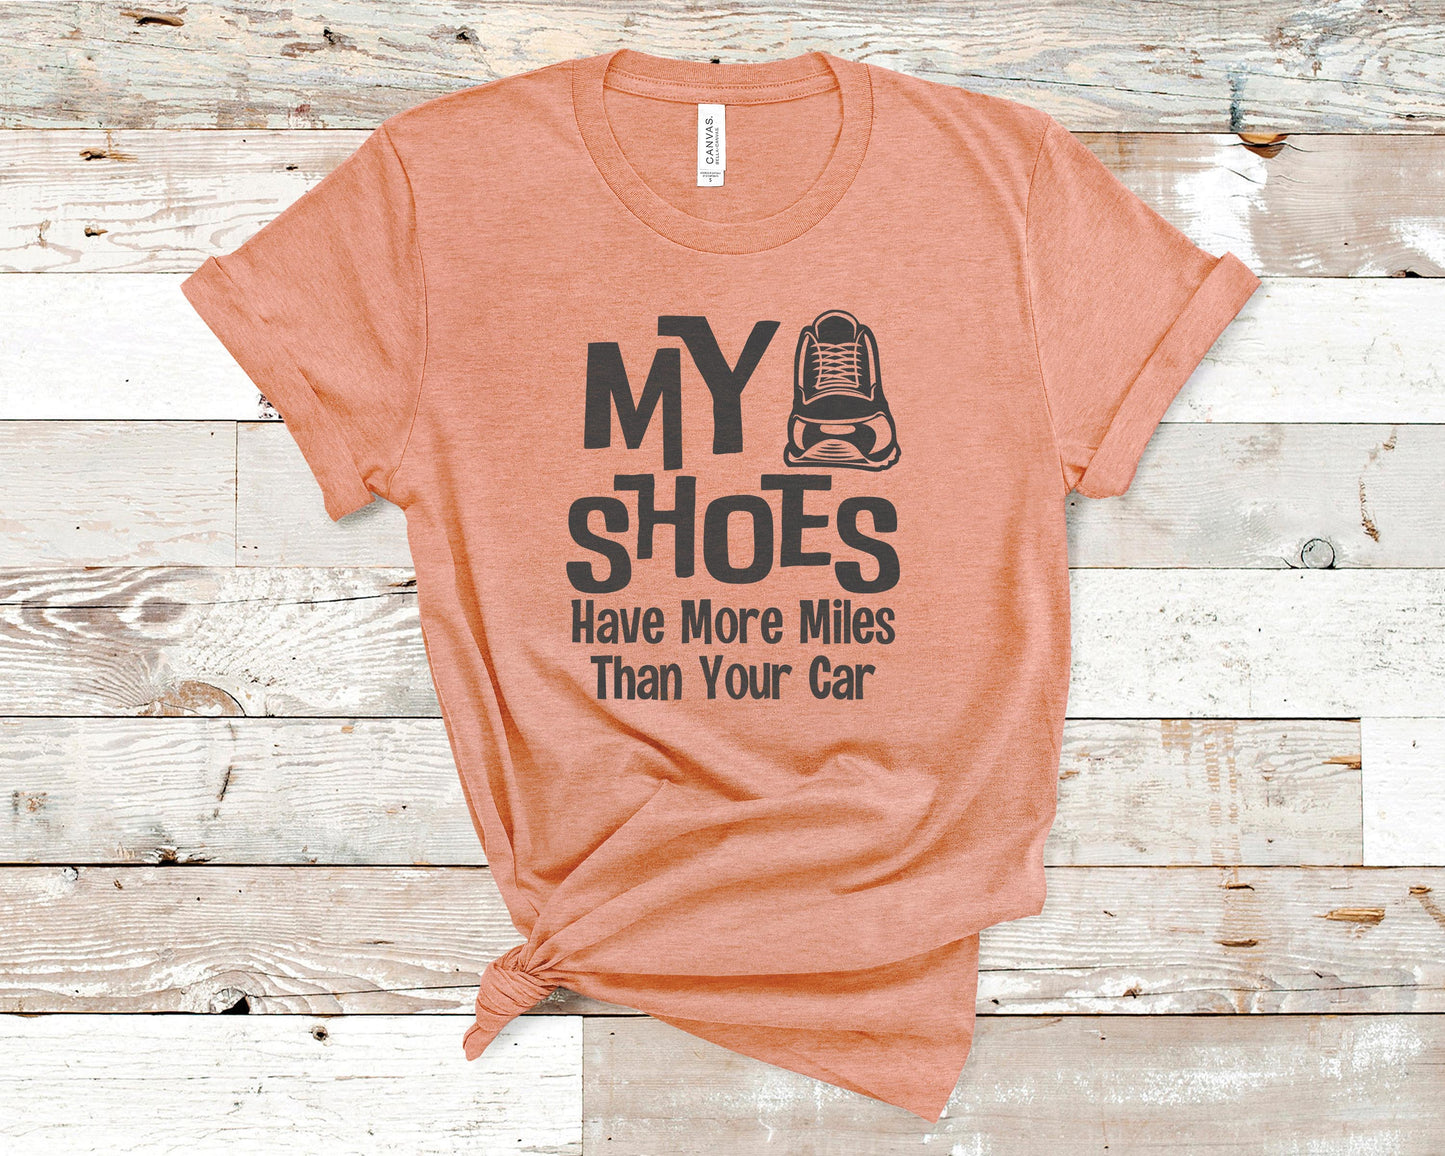 My Shoes Have More Miles than Your Car - Fitness Shirt